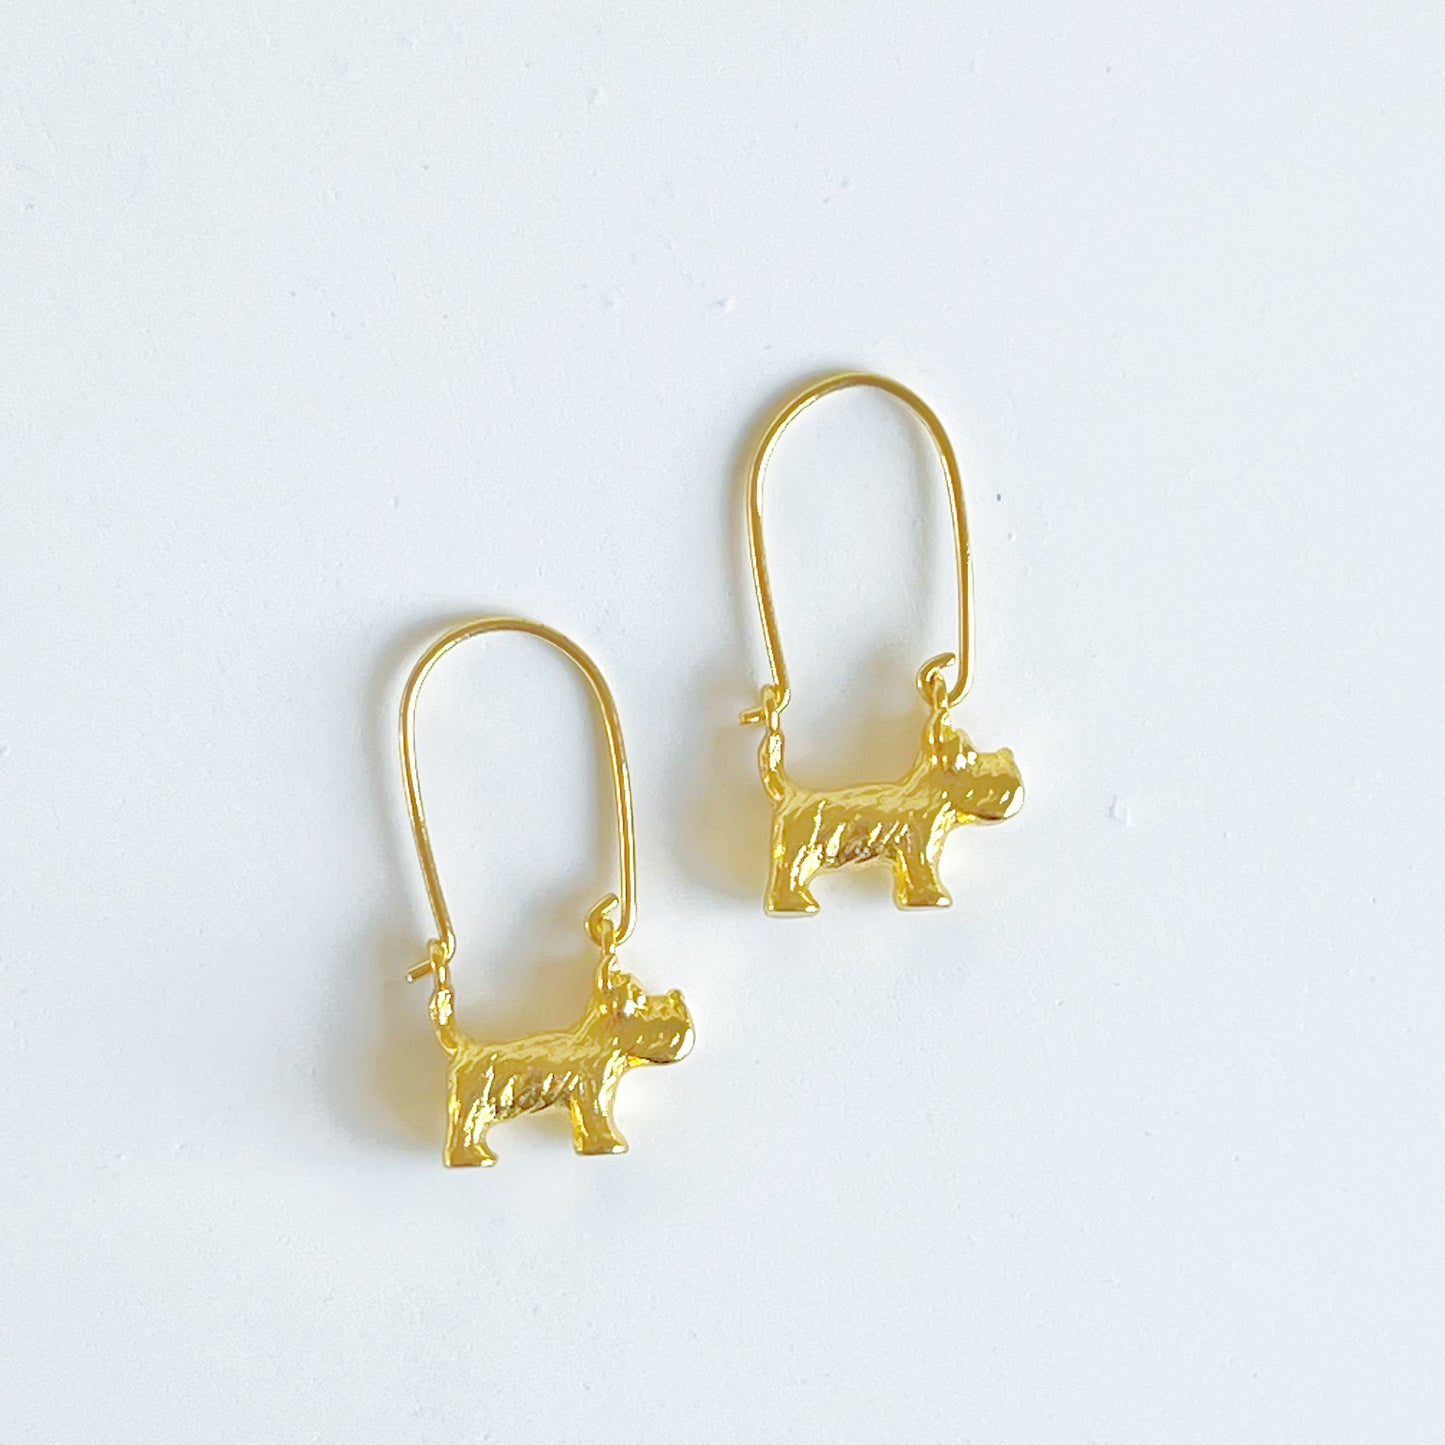 West Highland White Terrier Dog Earrings-Ninaouity